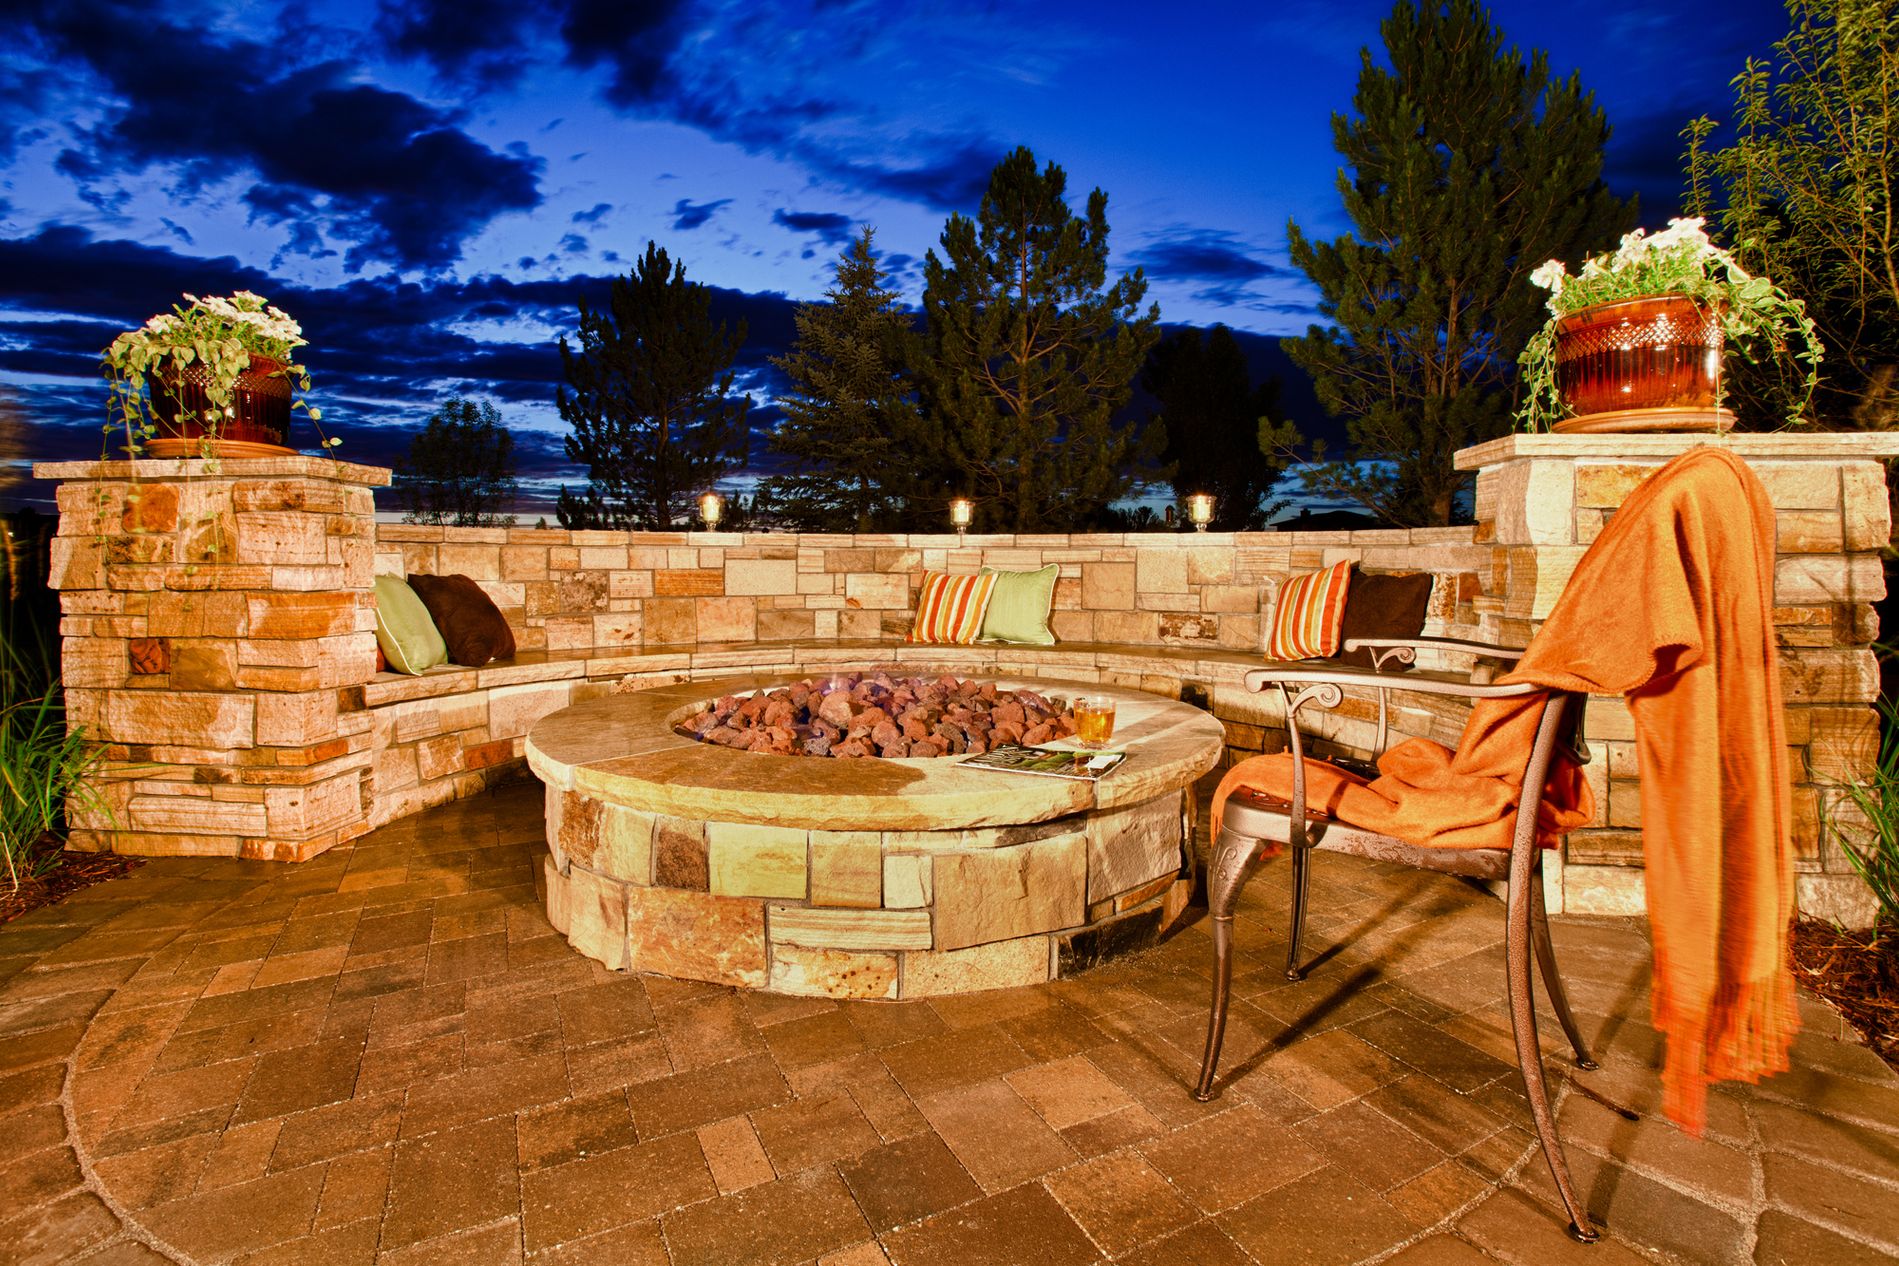 Fire Pit at Night with Masonry Seating